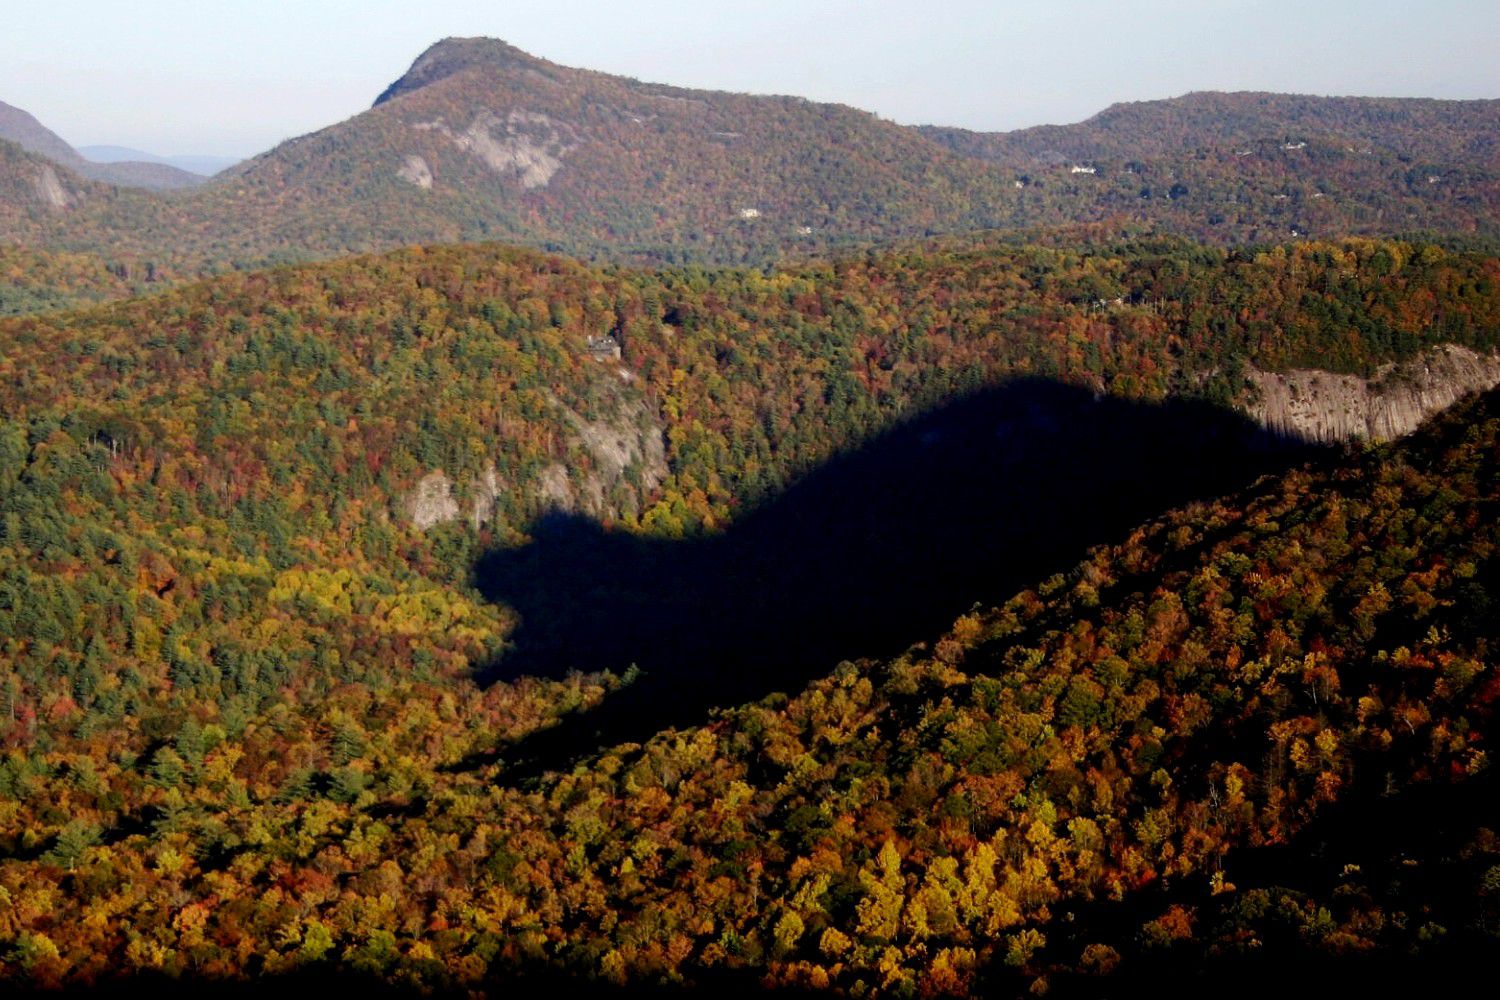 The Shadow of the Bear in the North Carolina Mountains